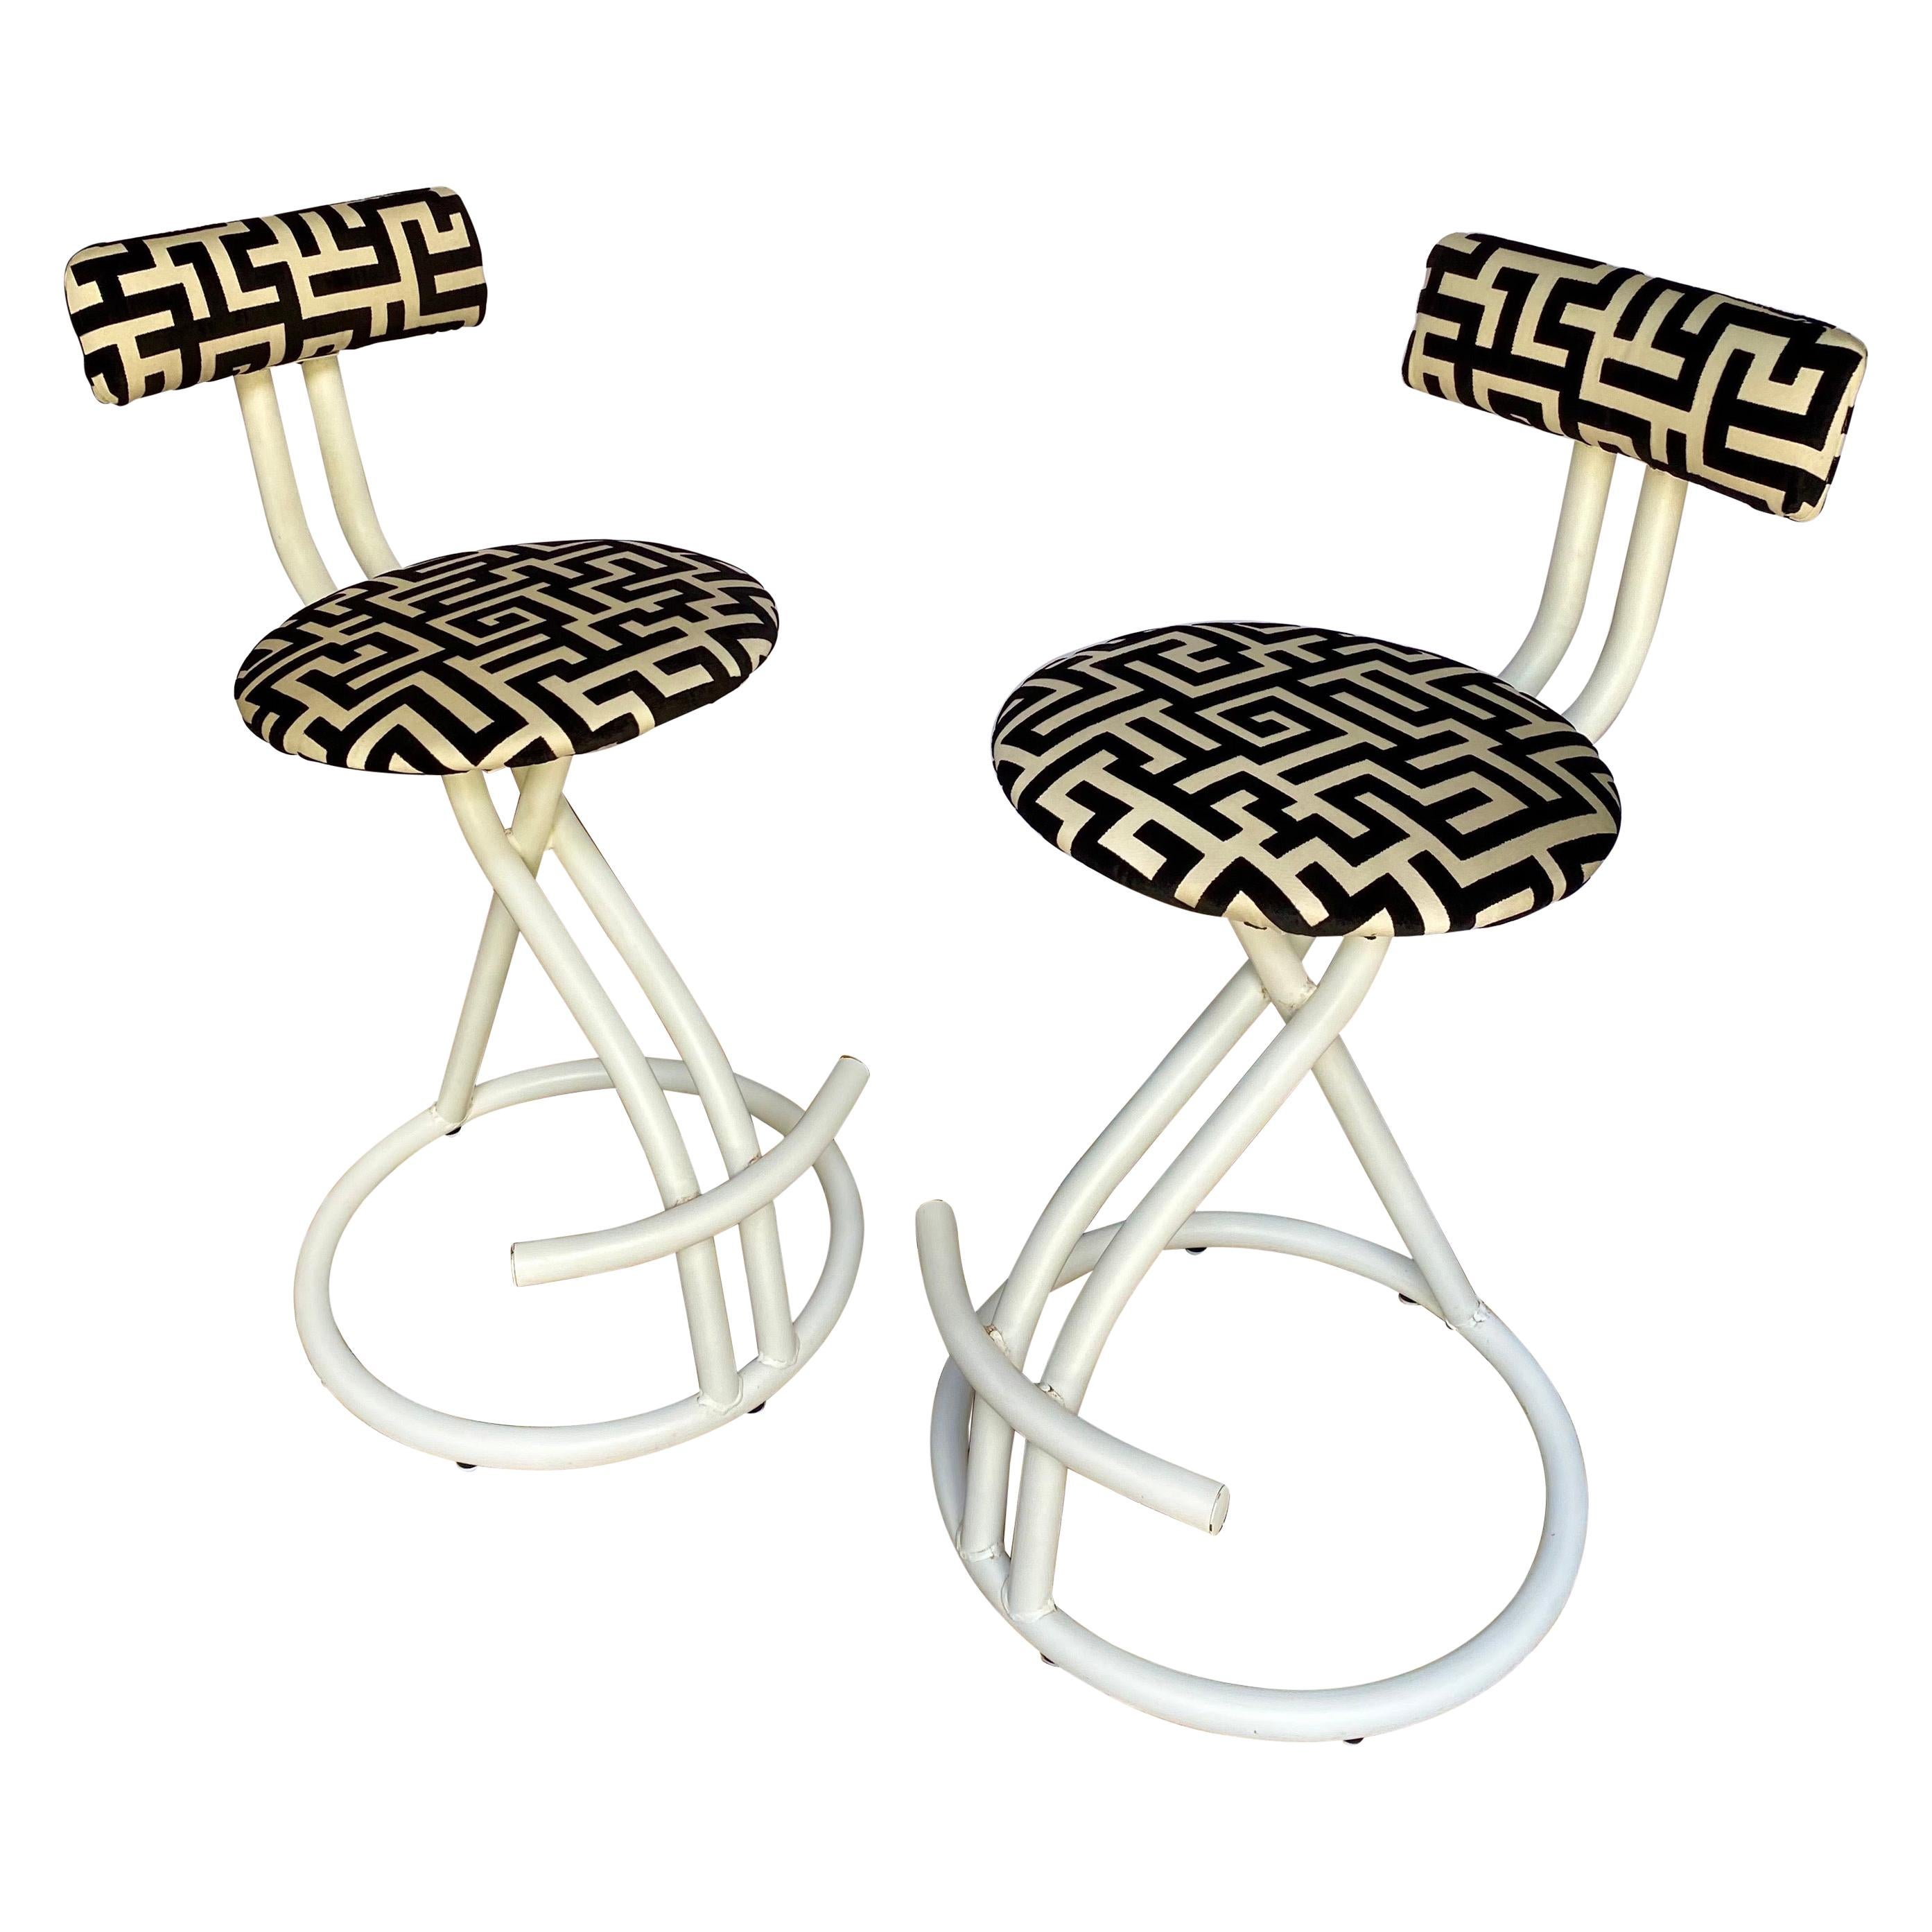 Post Modern Memphis Milano Style Geometric Swivel Stools by Cal-Style, Pair